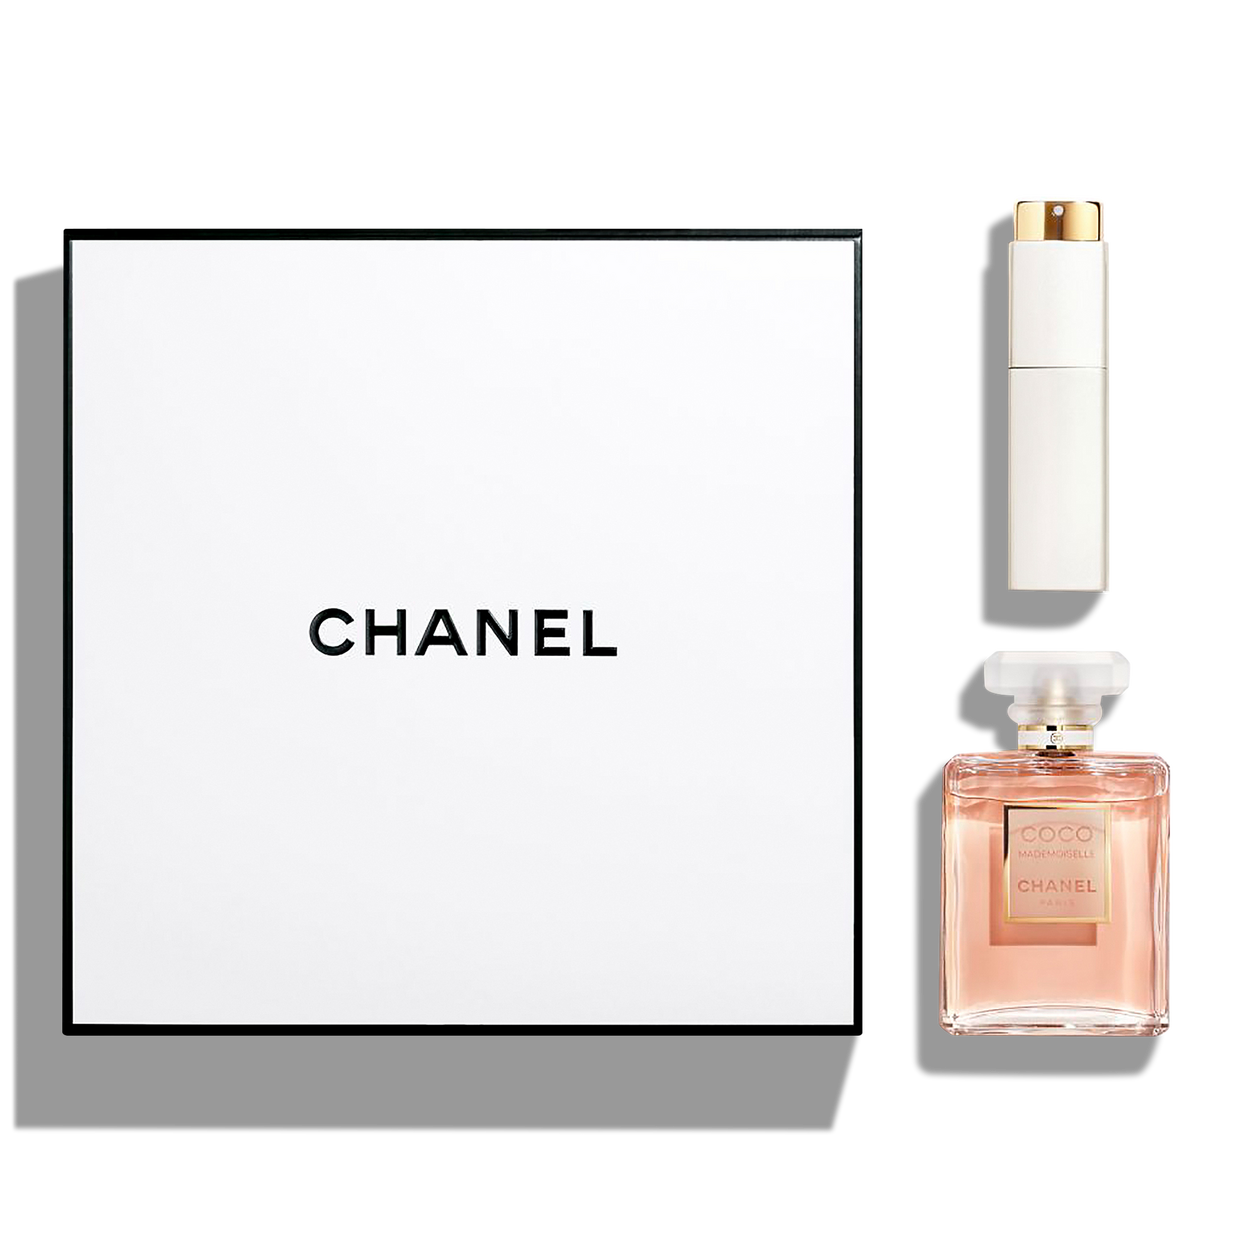 coco mademoiselle chanel perfume travel size refill